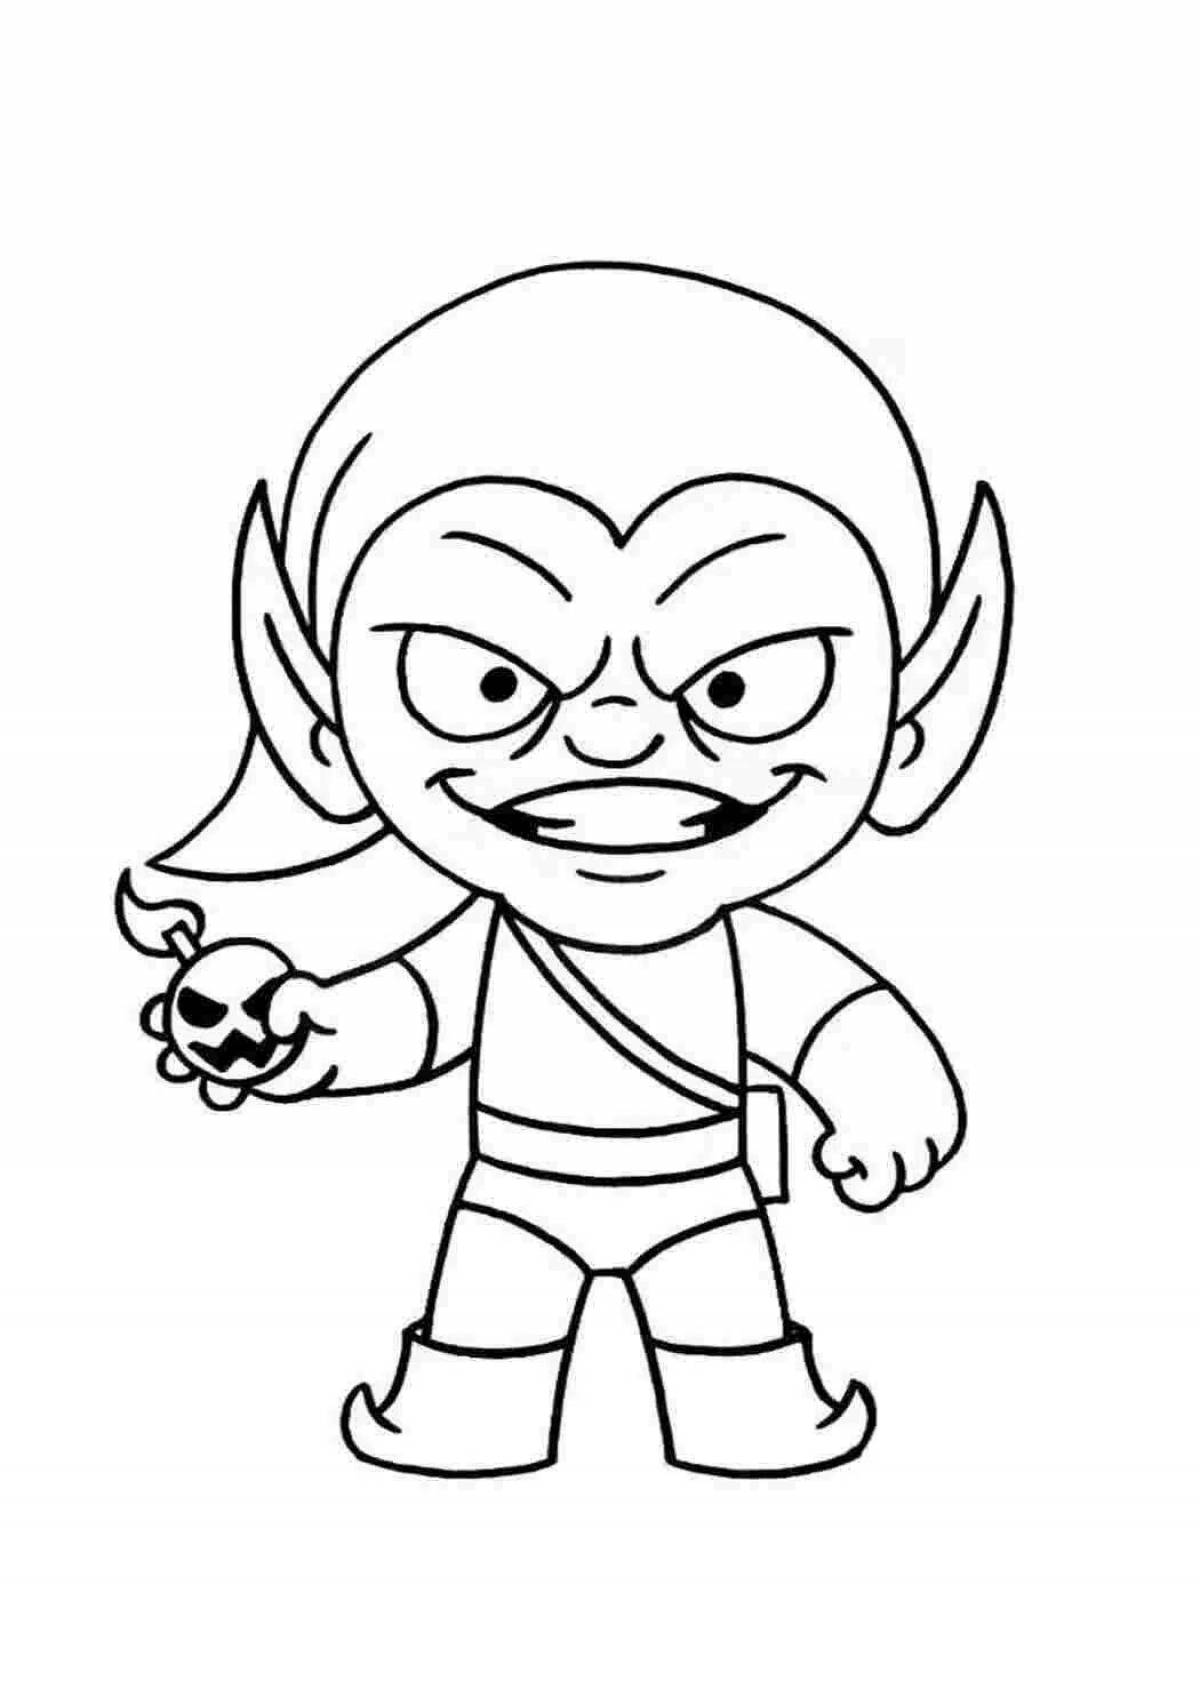 Colorful goblin coloring page for kids